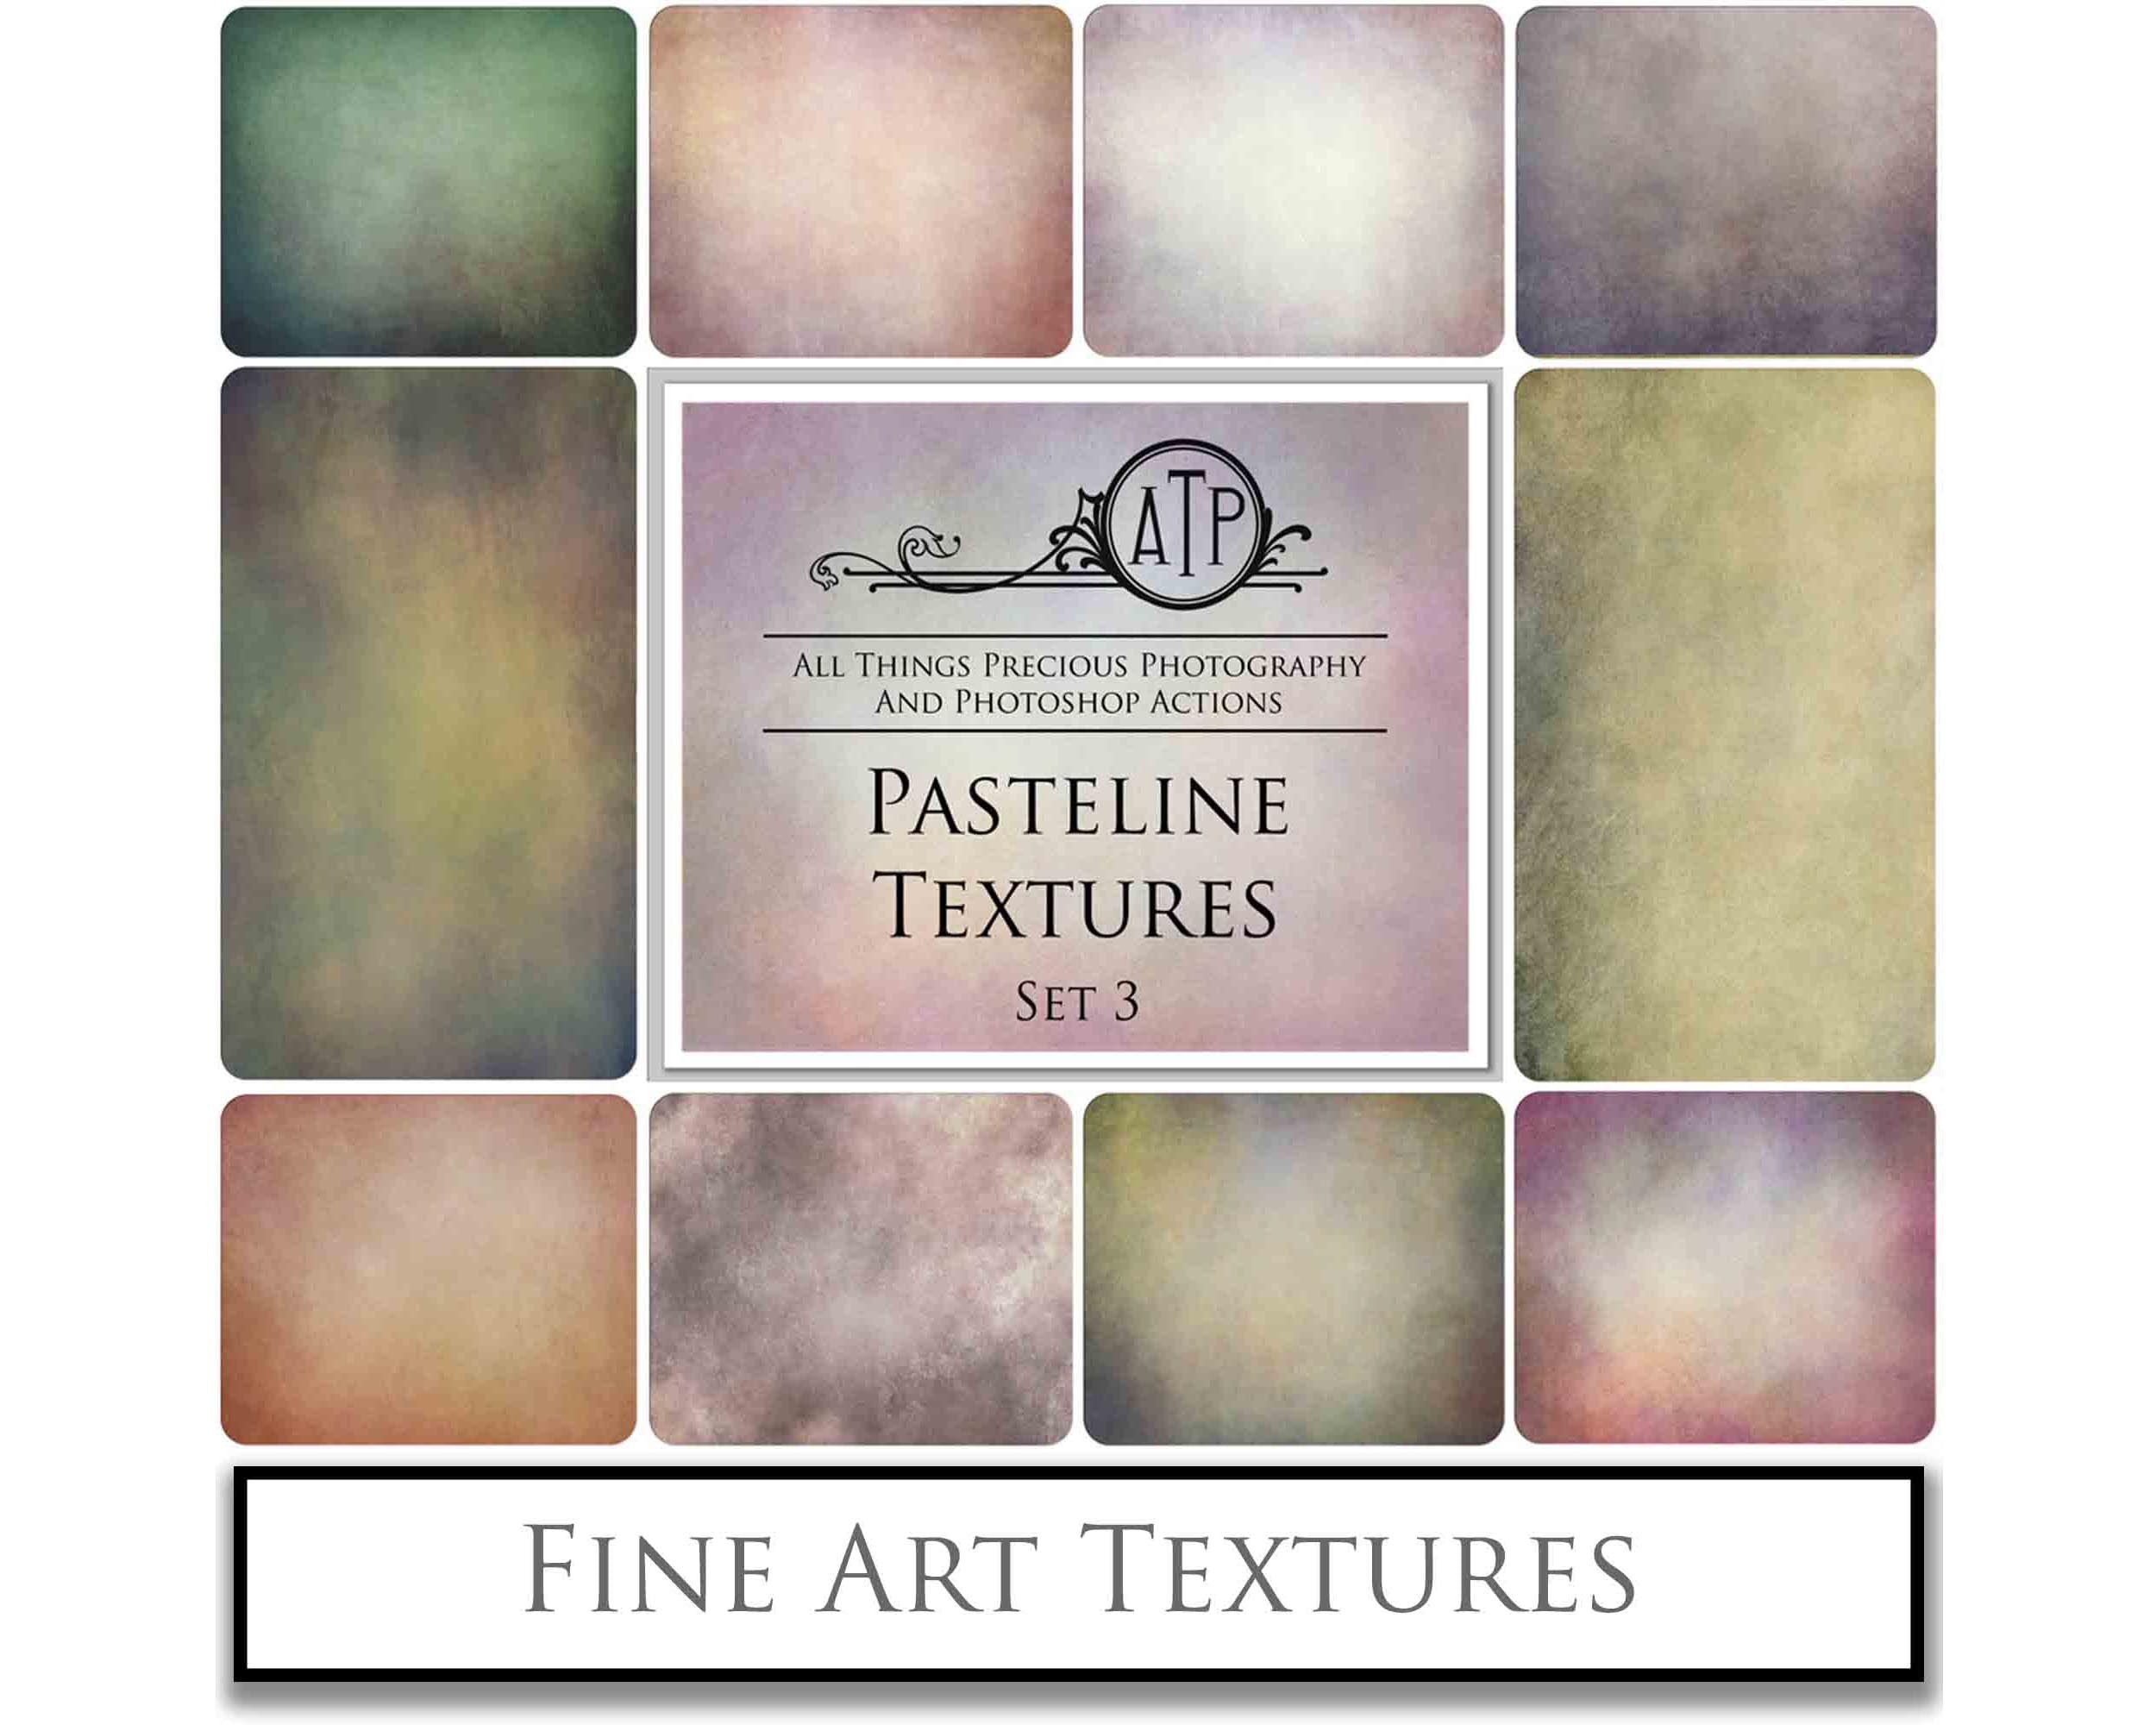 Pastel textures. Fine art texture for photographers, digital editing. Photo Overlays. Antique, Vintage, Grunge, Light, Dark Bundle. Textured printable Canvas, Colour, black and white, Bundle. High resolution, 300dpi Graphic Assets for photography, digital scrapbooking and design. By ATP Textures